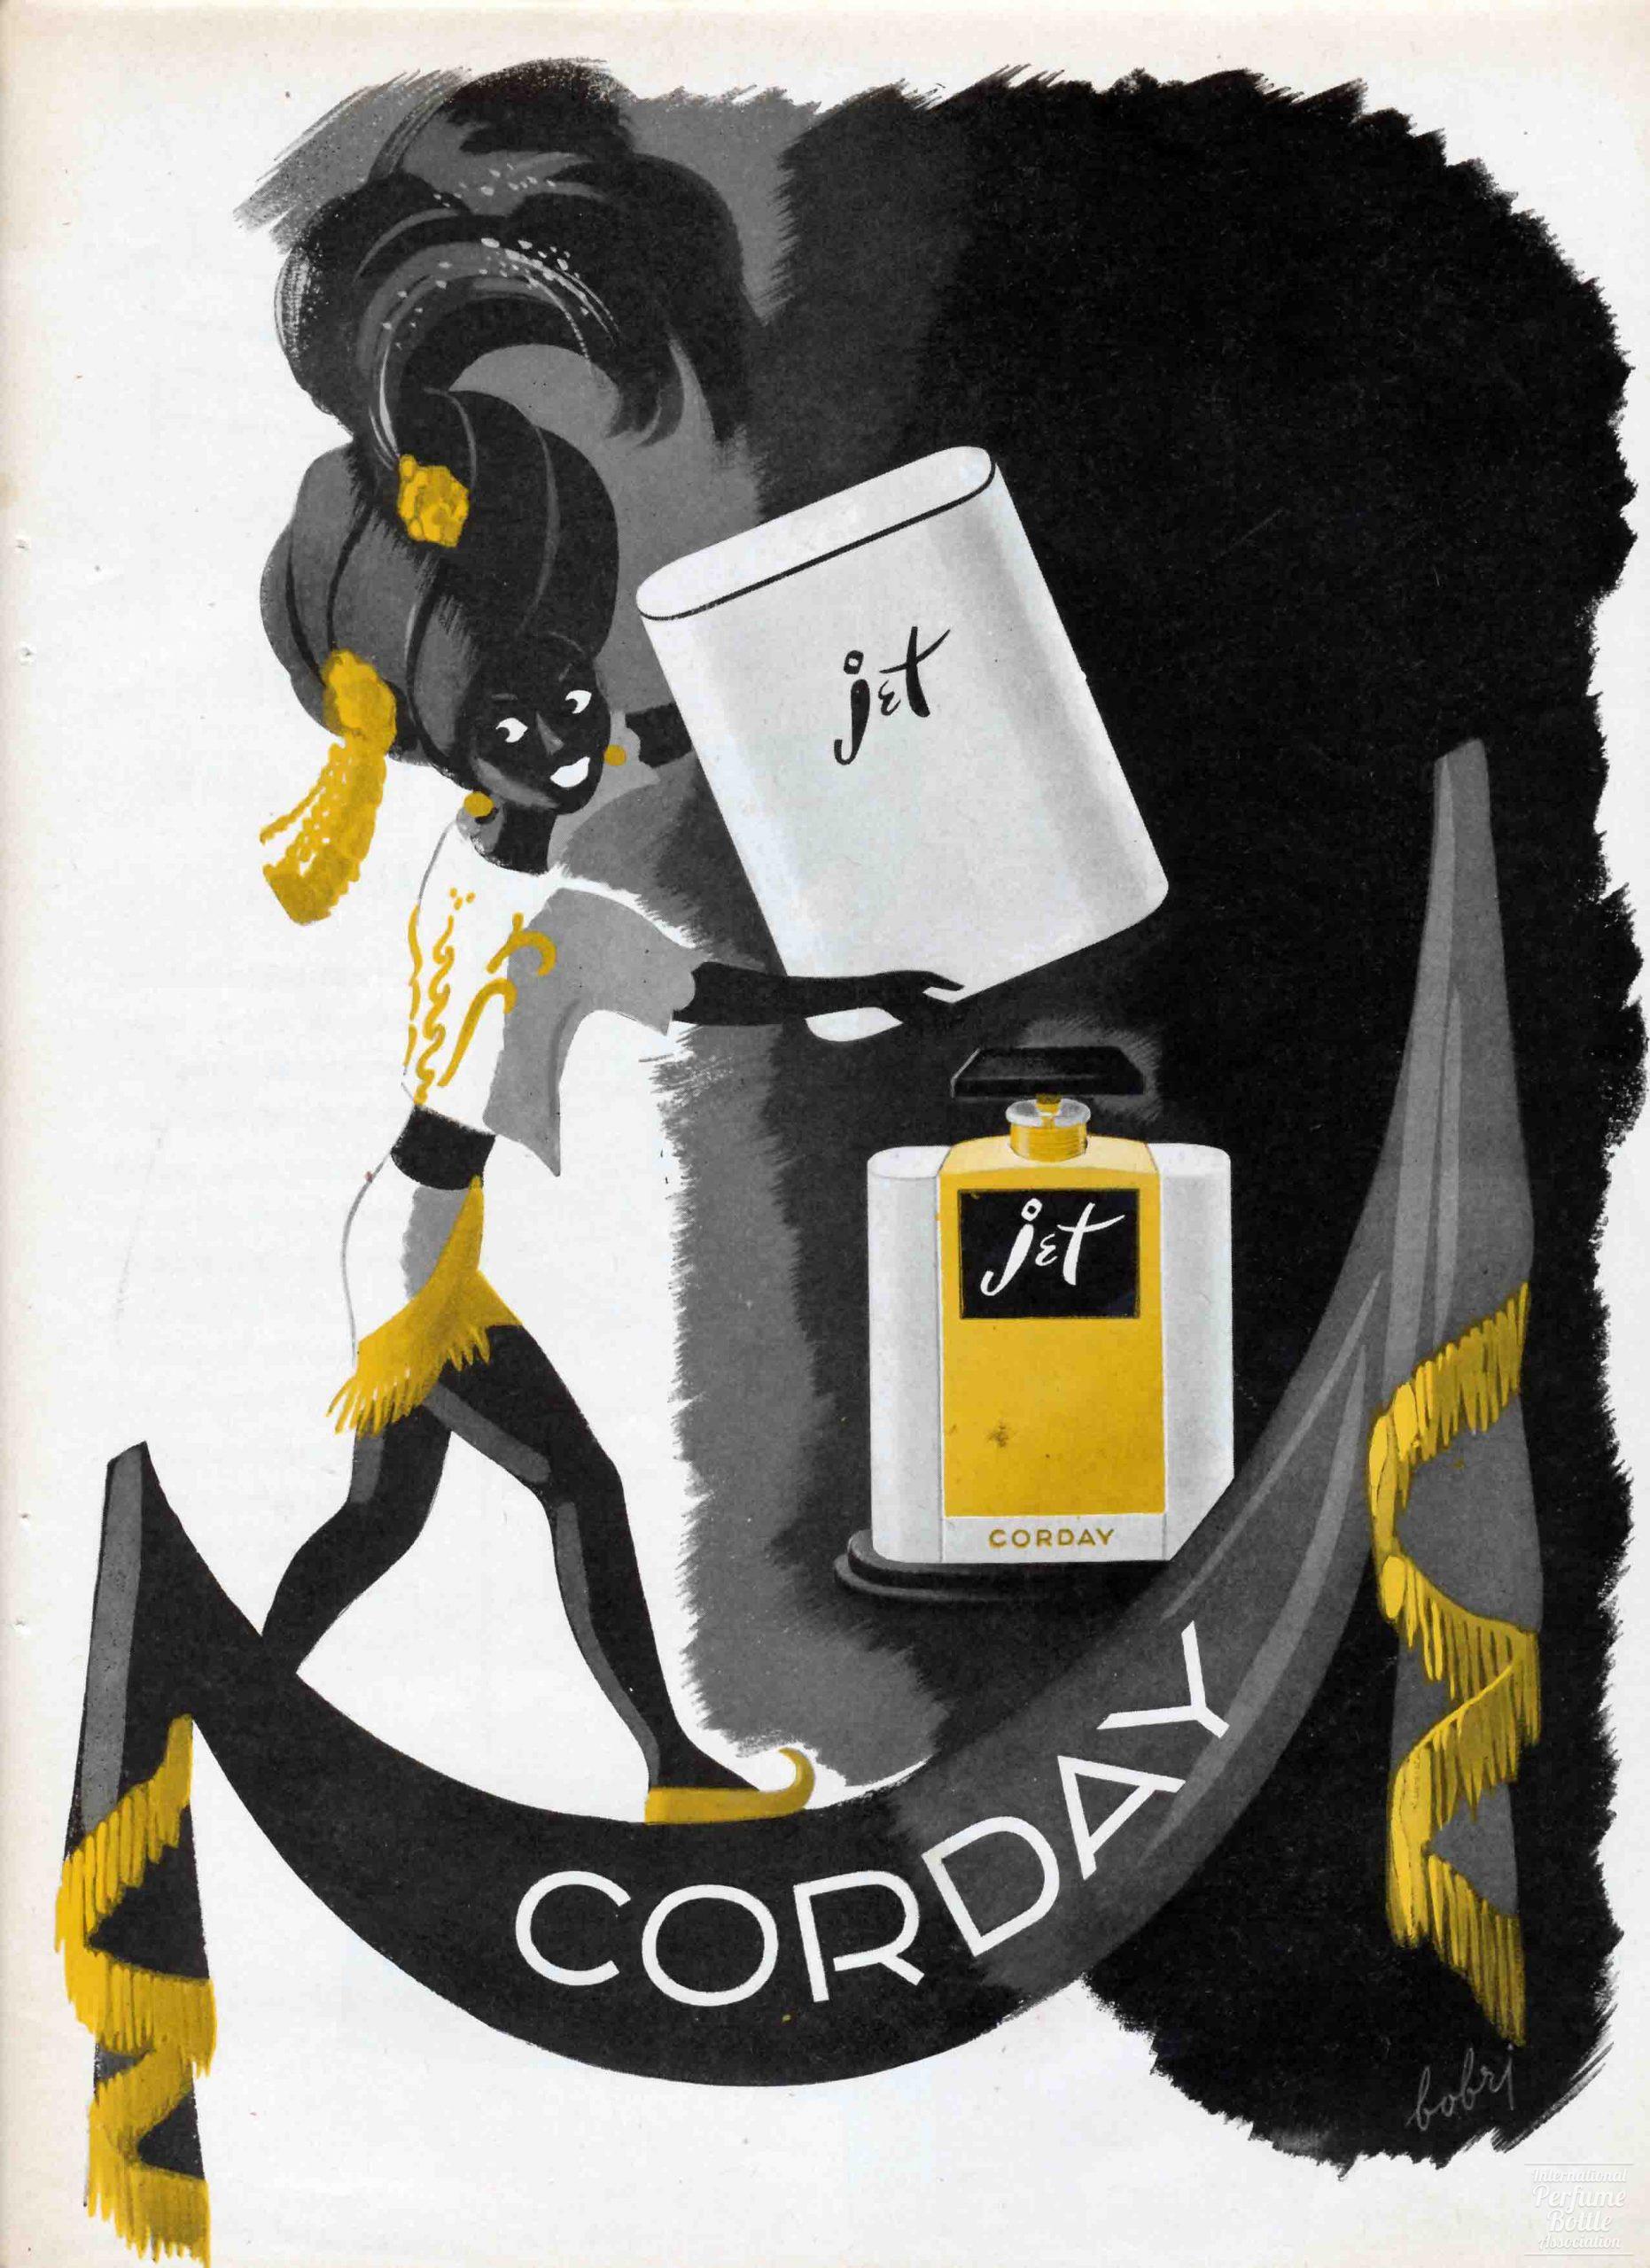 "Jet" by Corday Advertisement - 1944